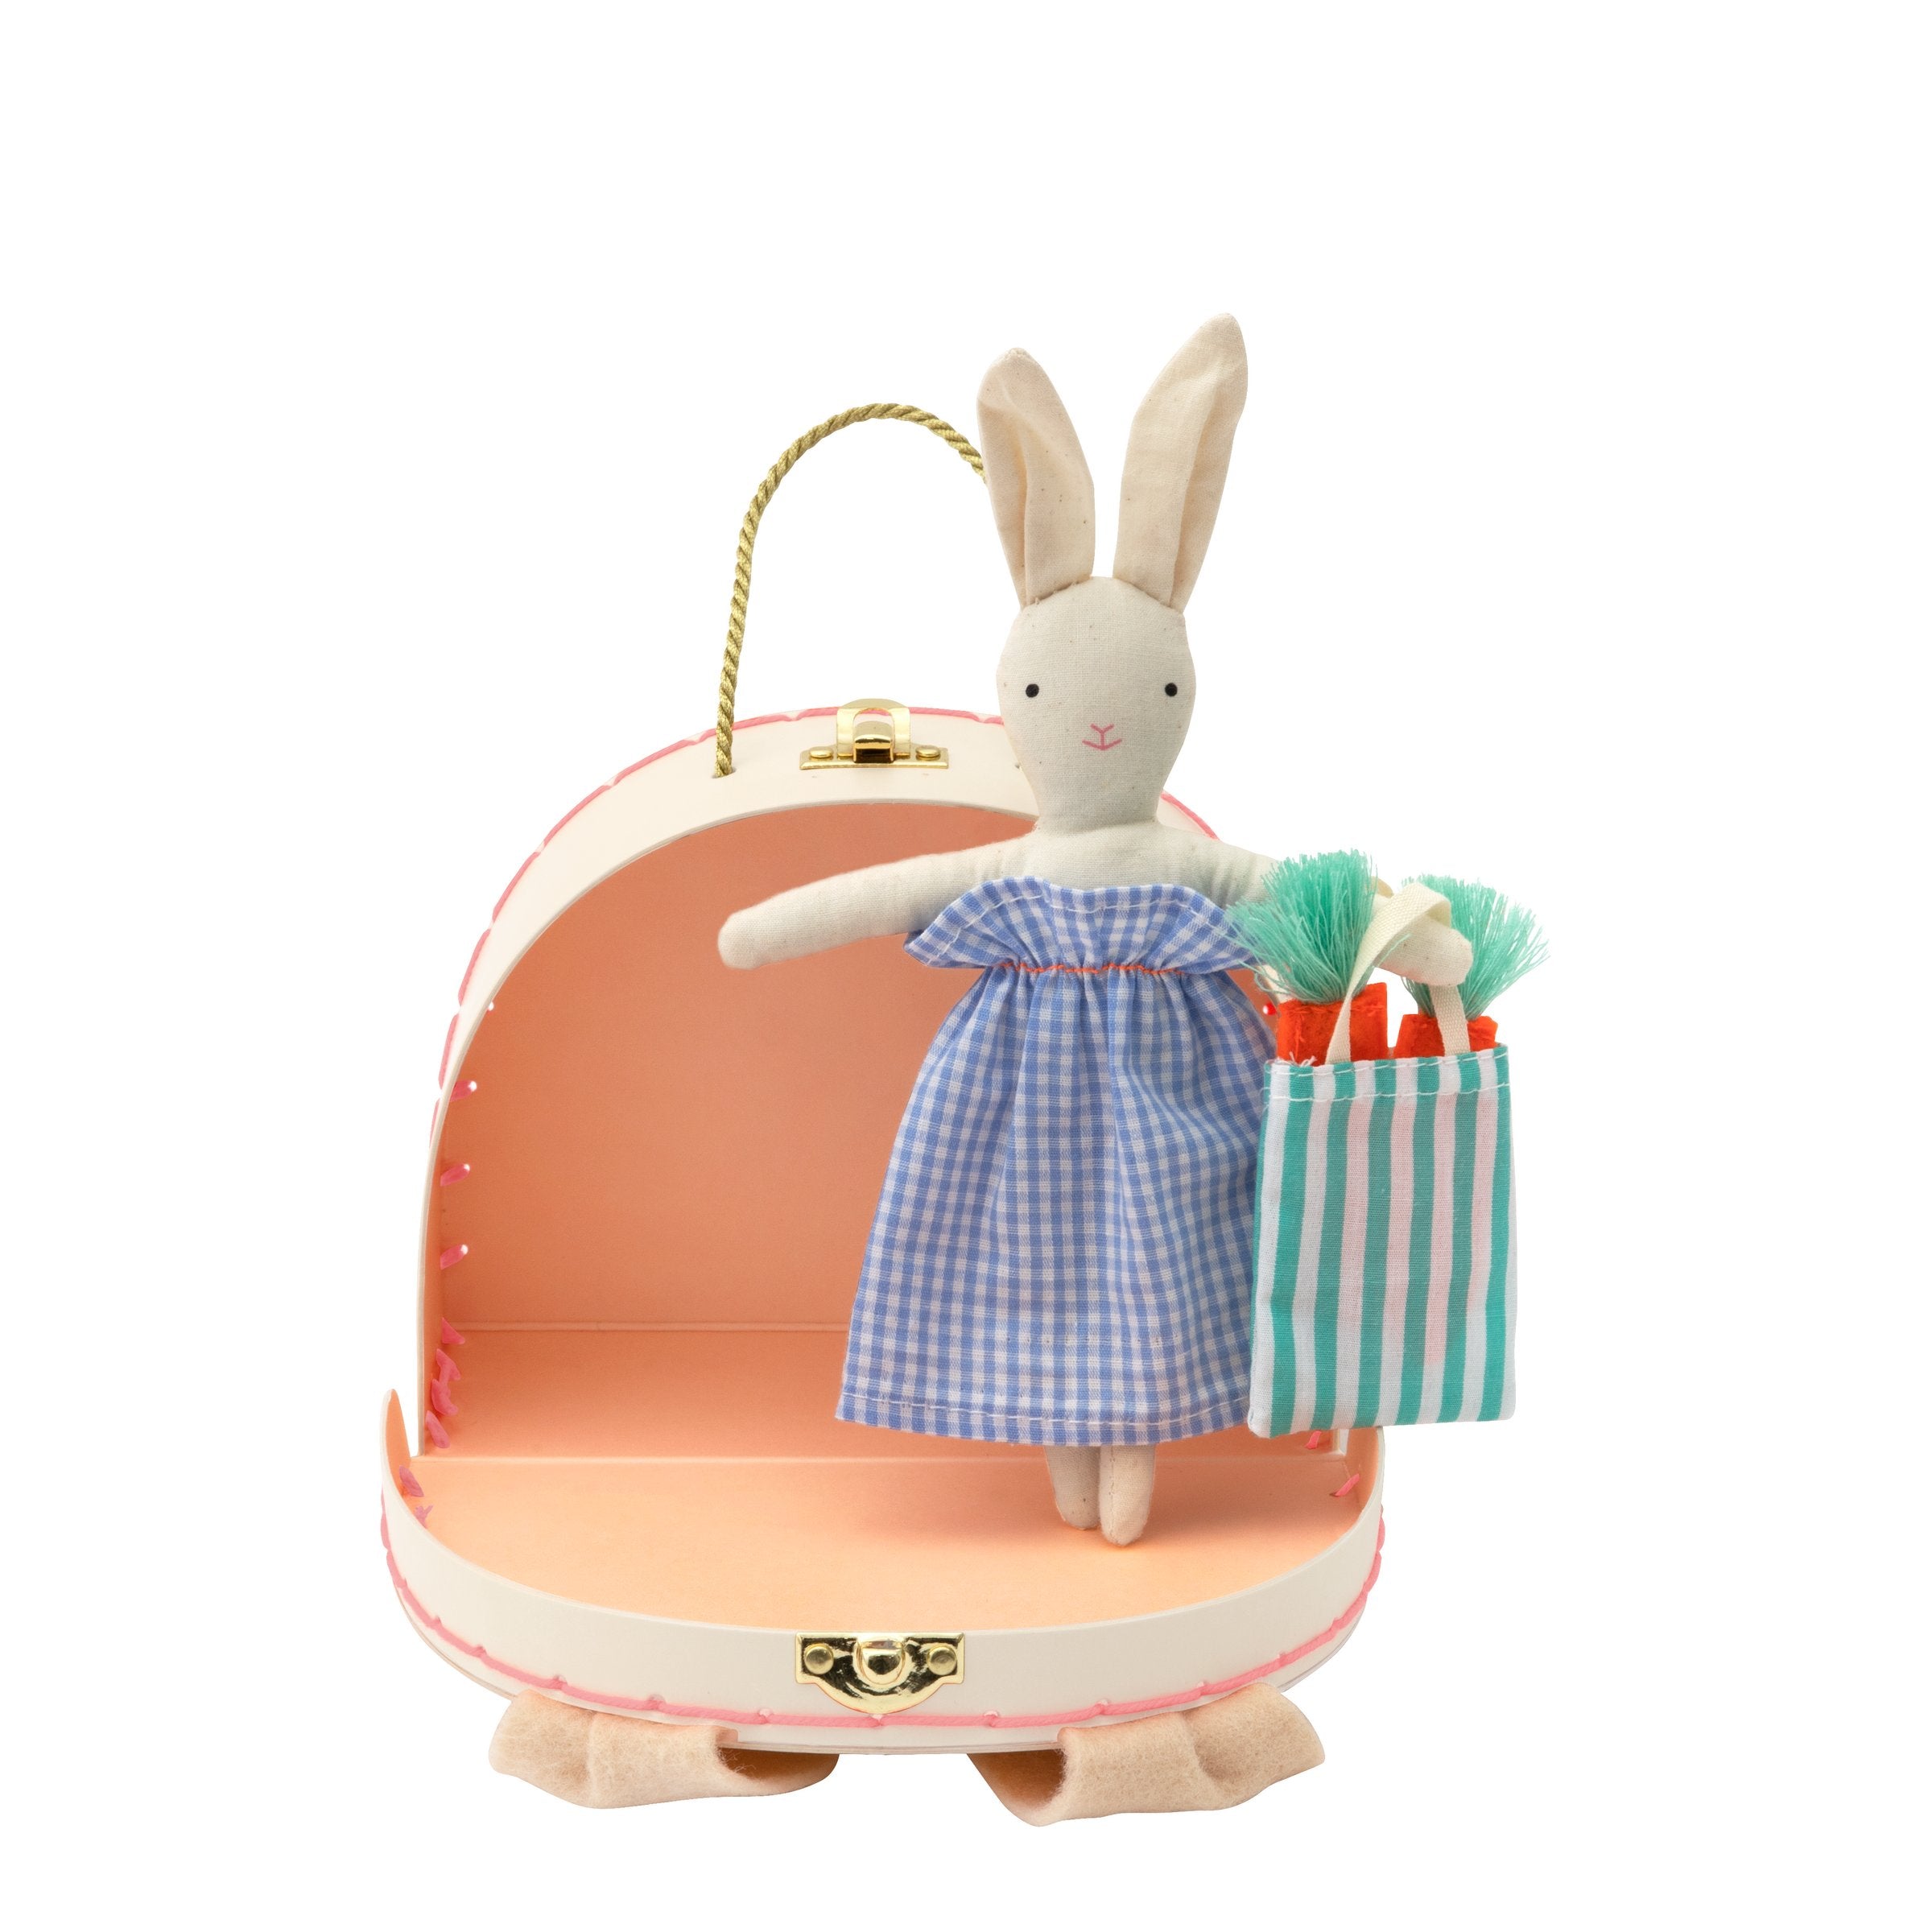 The bunny case opens to reveal an adorable mini bunny doll, with a striped tote bag and felt carrots.